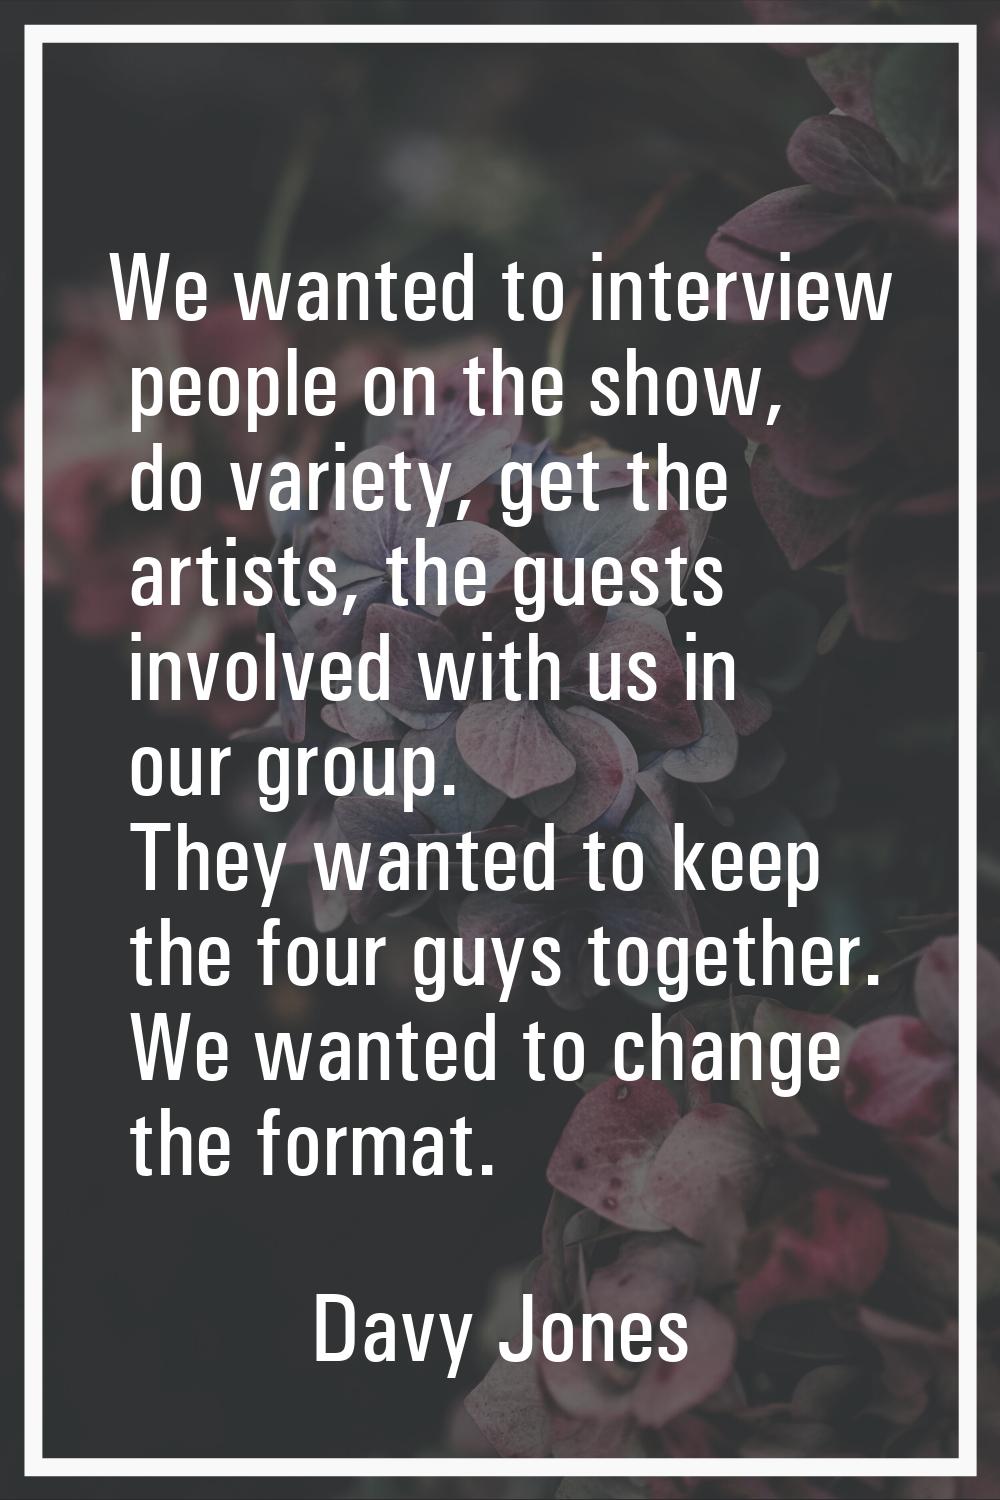 We wanted to interview people on the show, do variety, get the artists, the guests involved with us